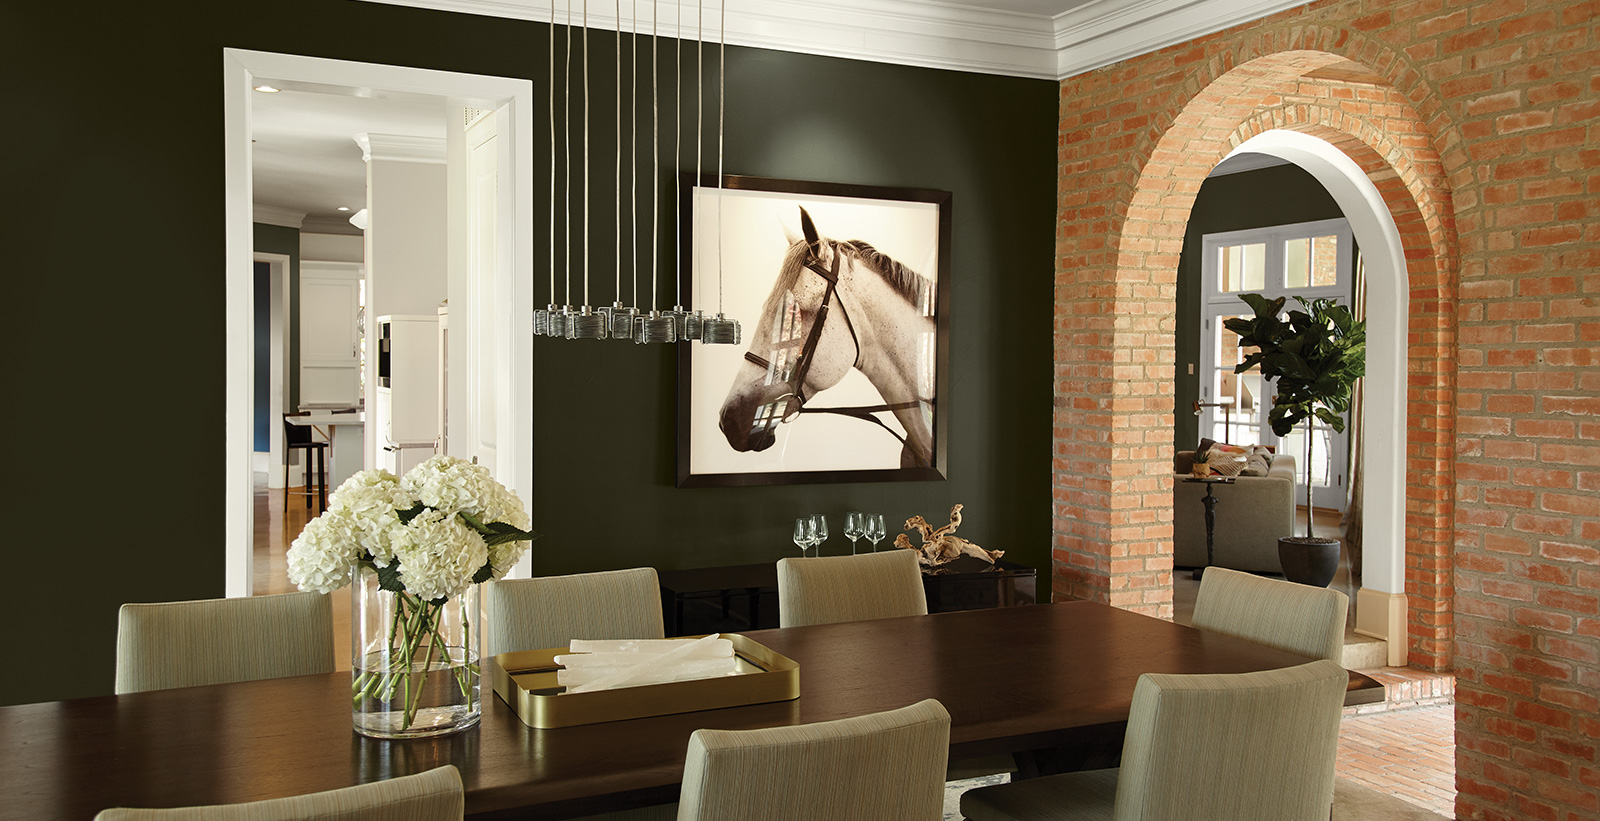 Contemporary farmhouse dining room with dark forest green on walls and white trim, brick accent wall surrounds an arched entryway.